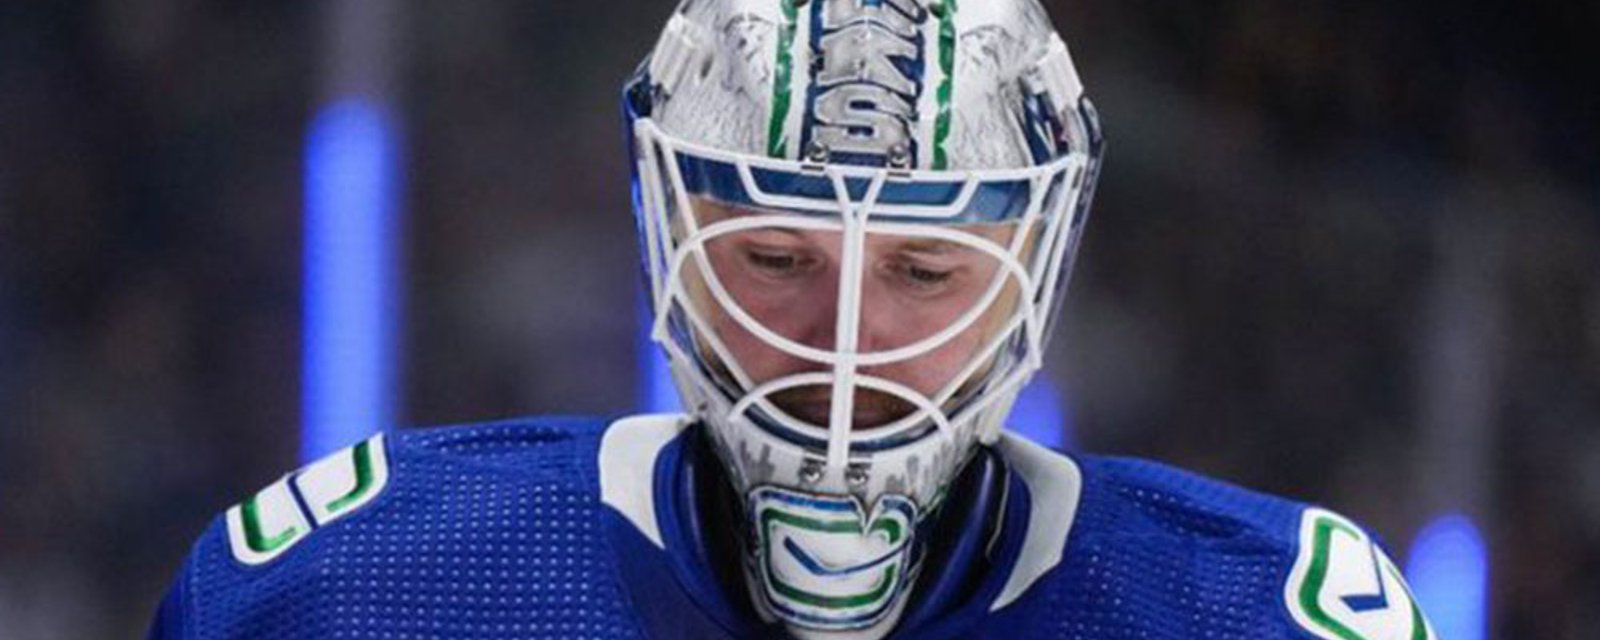 Canucks goalie Thatcher Demko pukes in his own mask during play